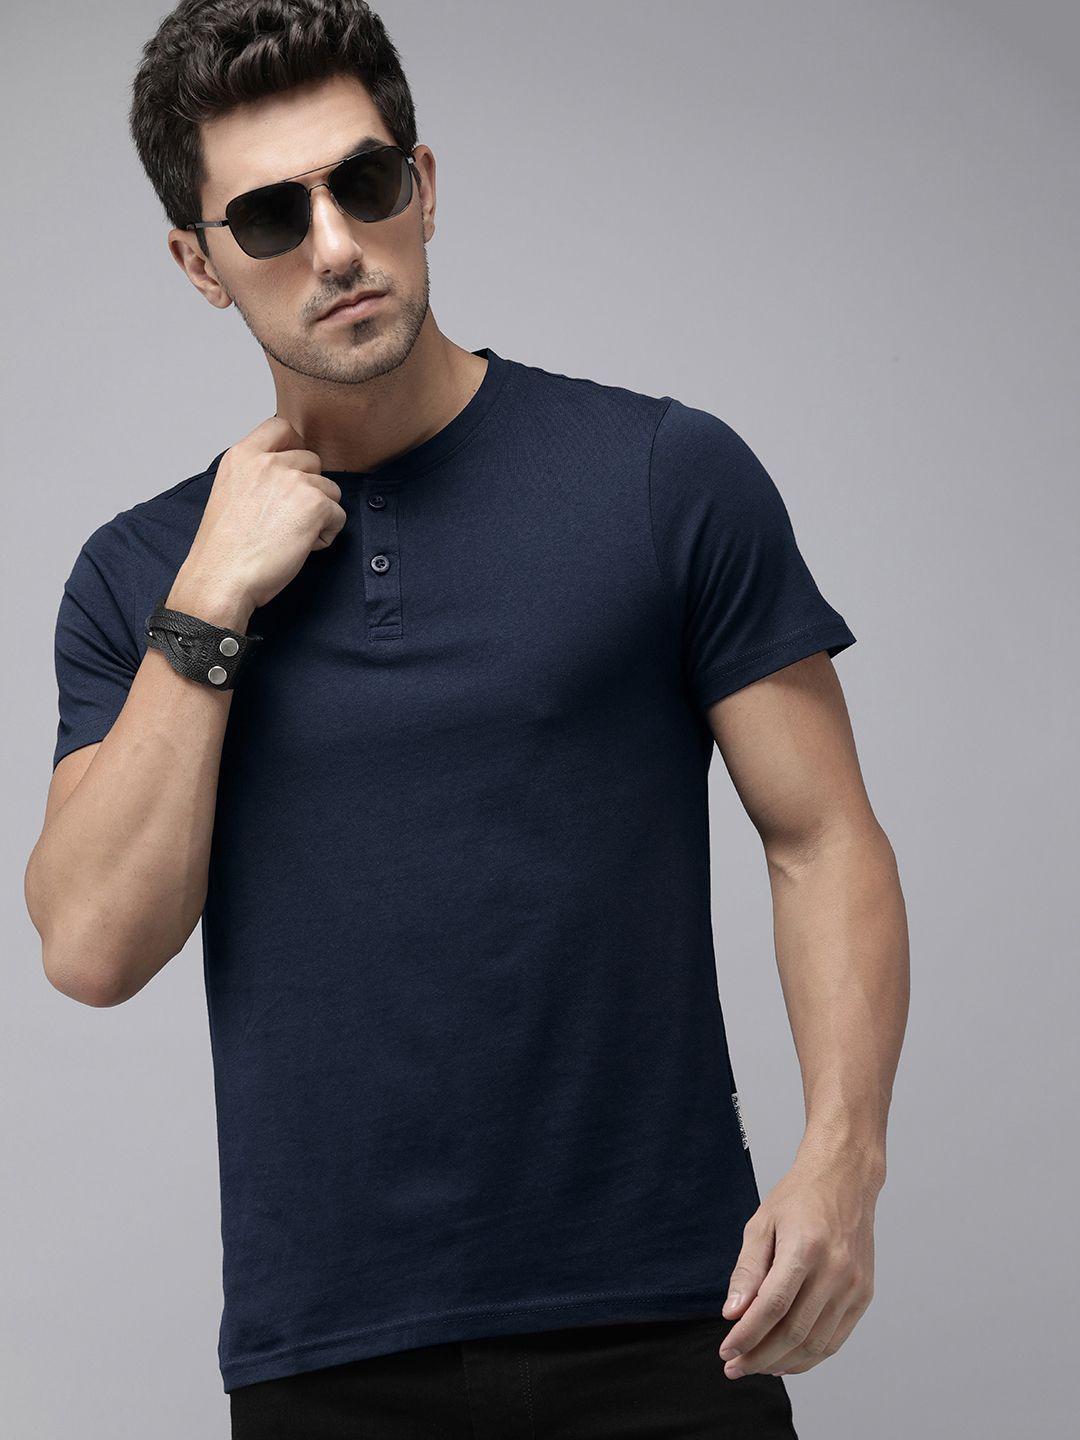 the roadster life co. henley neck pure cotton t-shirt